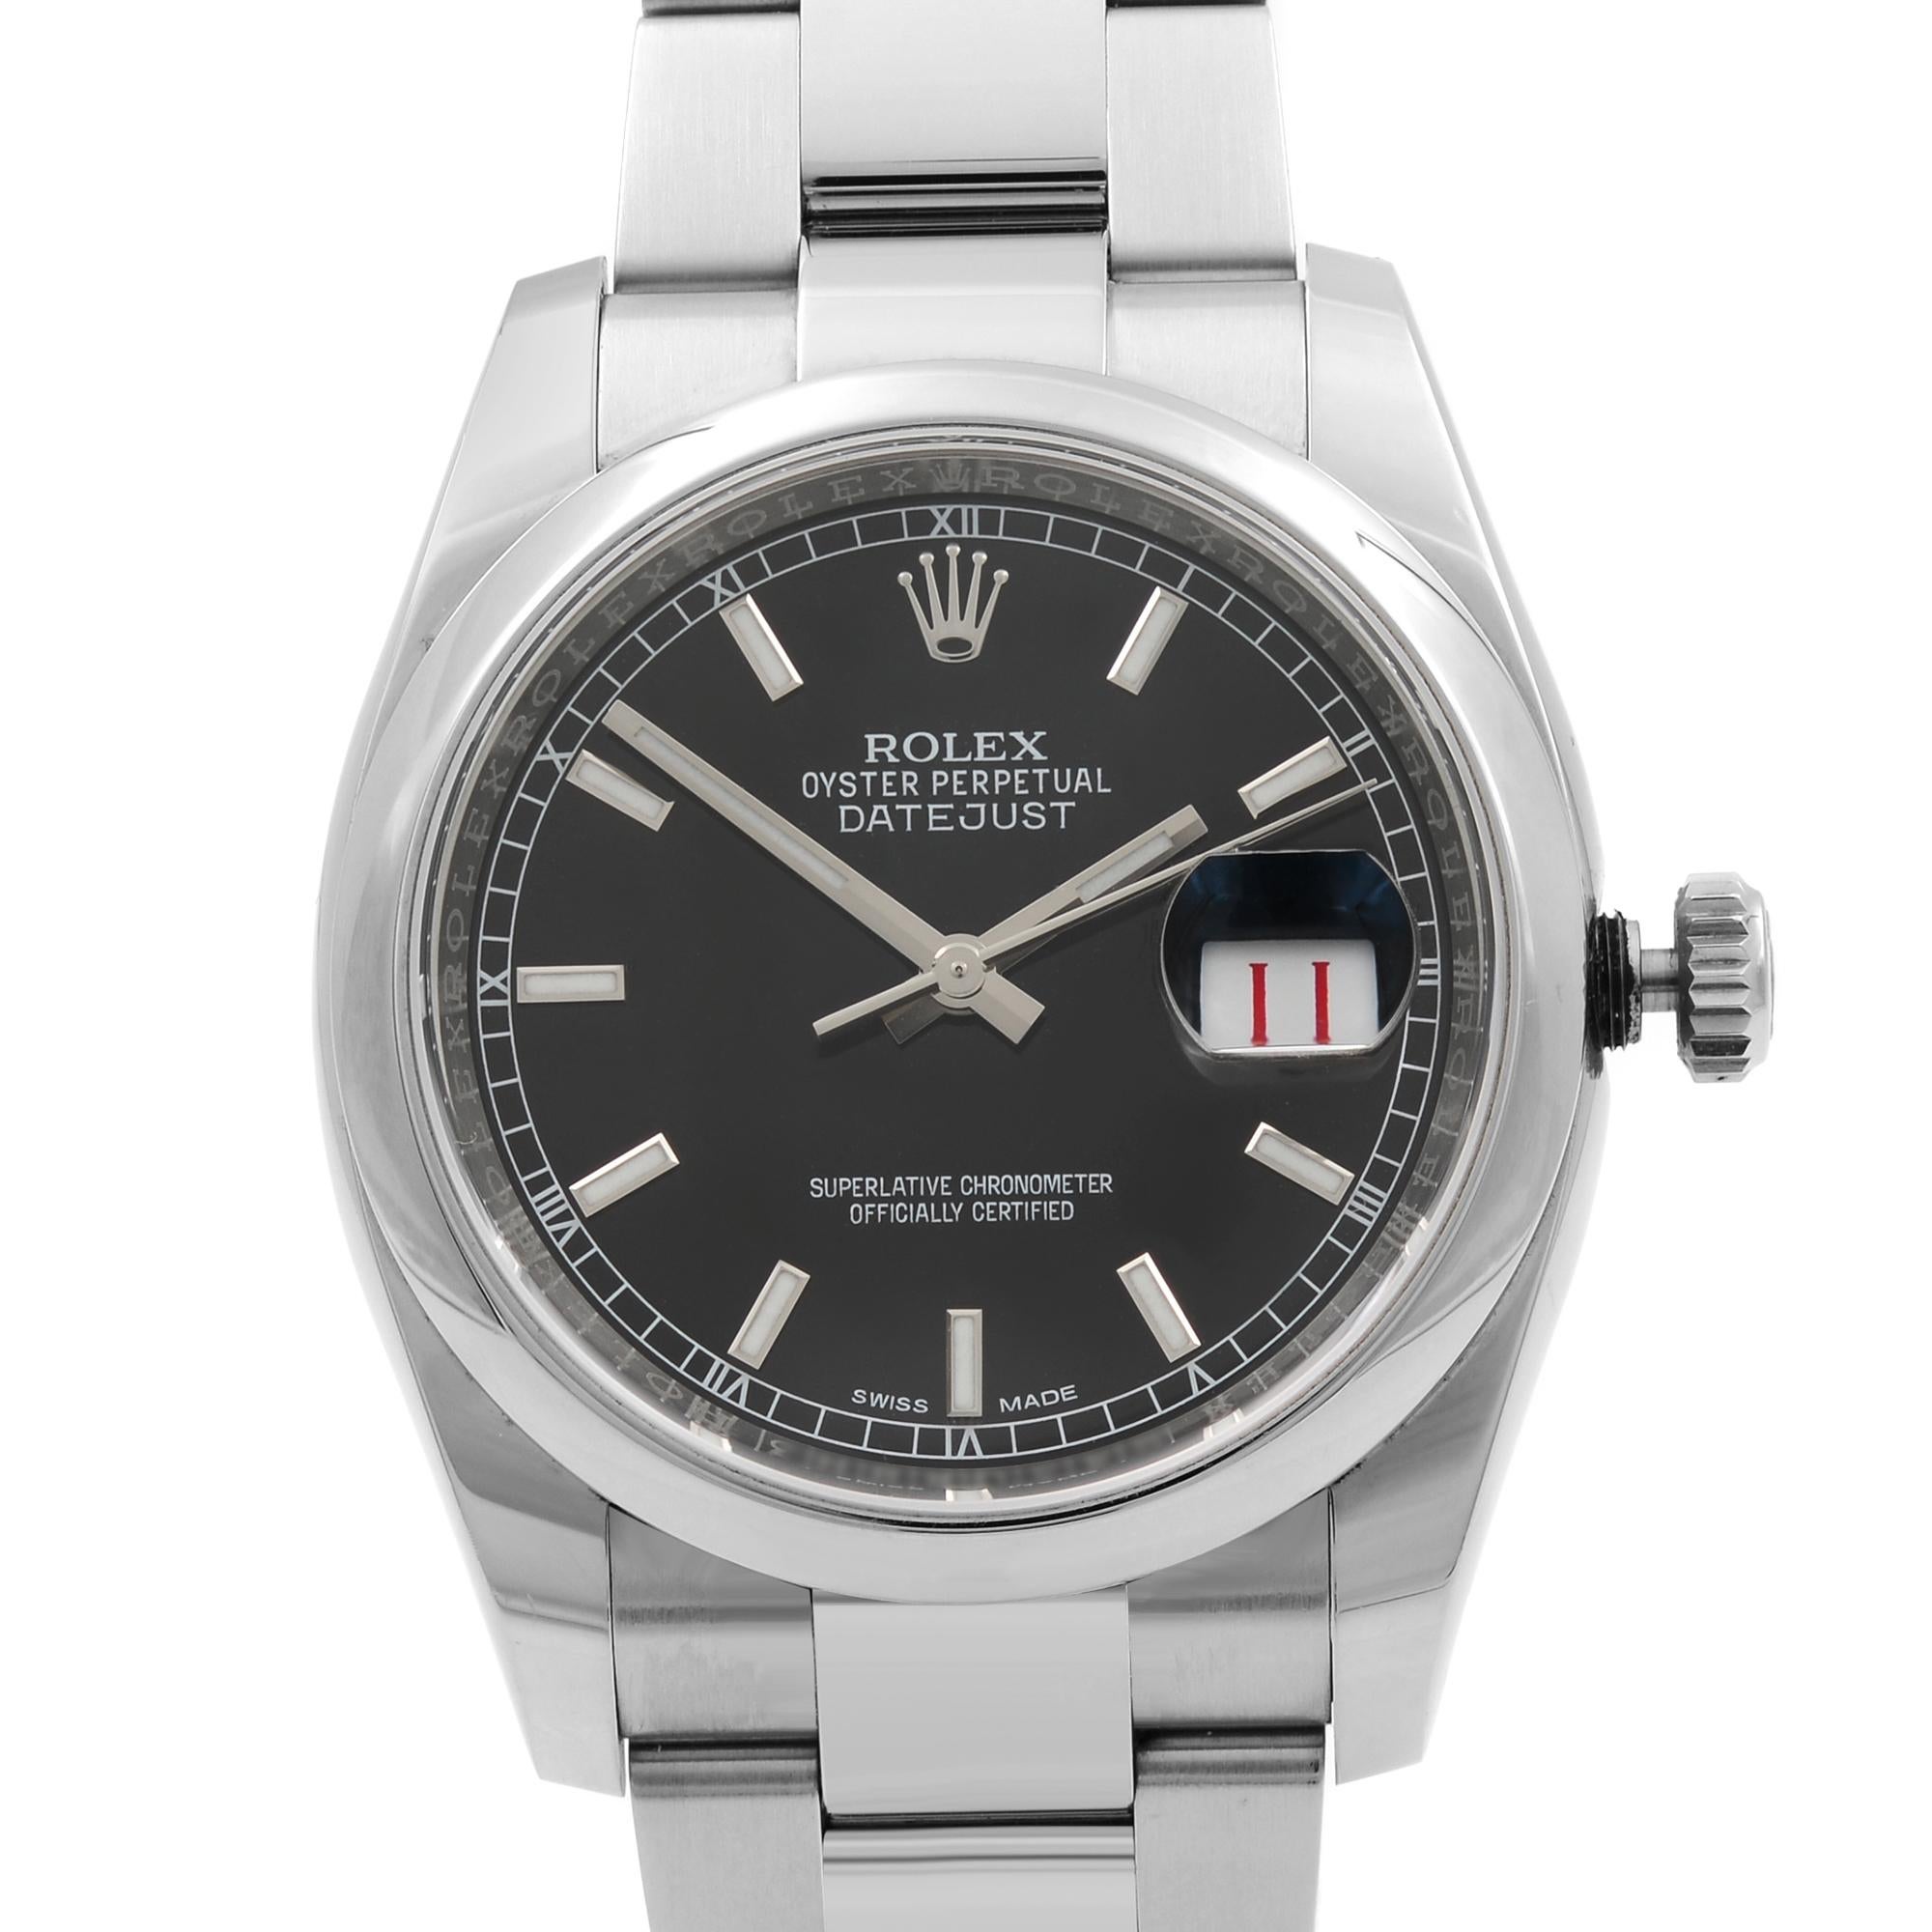 Original Box and Papers are included Covered by a one-year Chronostore warranty.
Details:
Model Number 116200 bkso
Brand Rolex
Department Men
Style Classic, Luxury
Model Rolex Datejust 116200
Band Color Steel
Dial Color Black
Case Color